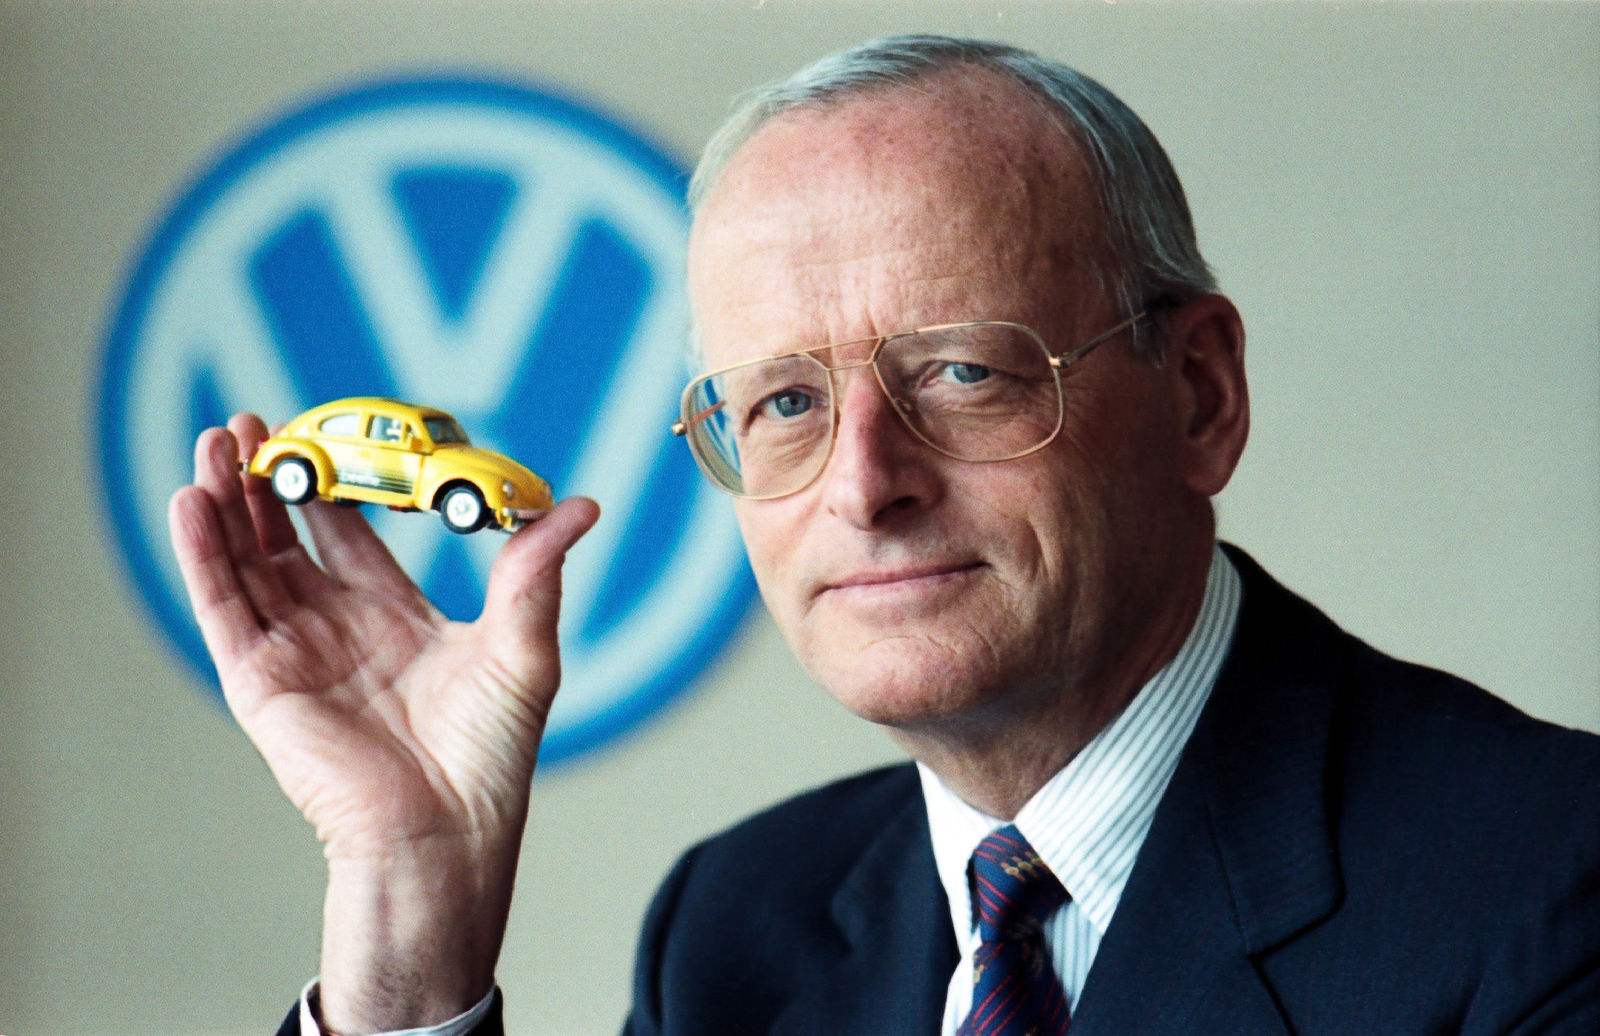 Prof. Dr. Carl H. Hahn, Chairman of the Board of Management of Volkswagen AG from 1982 to 1992